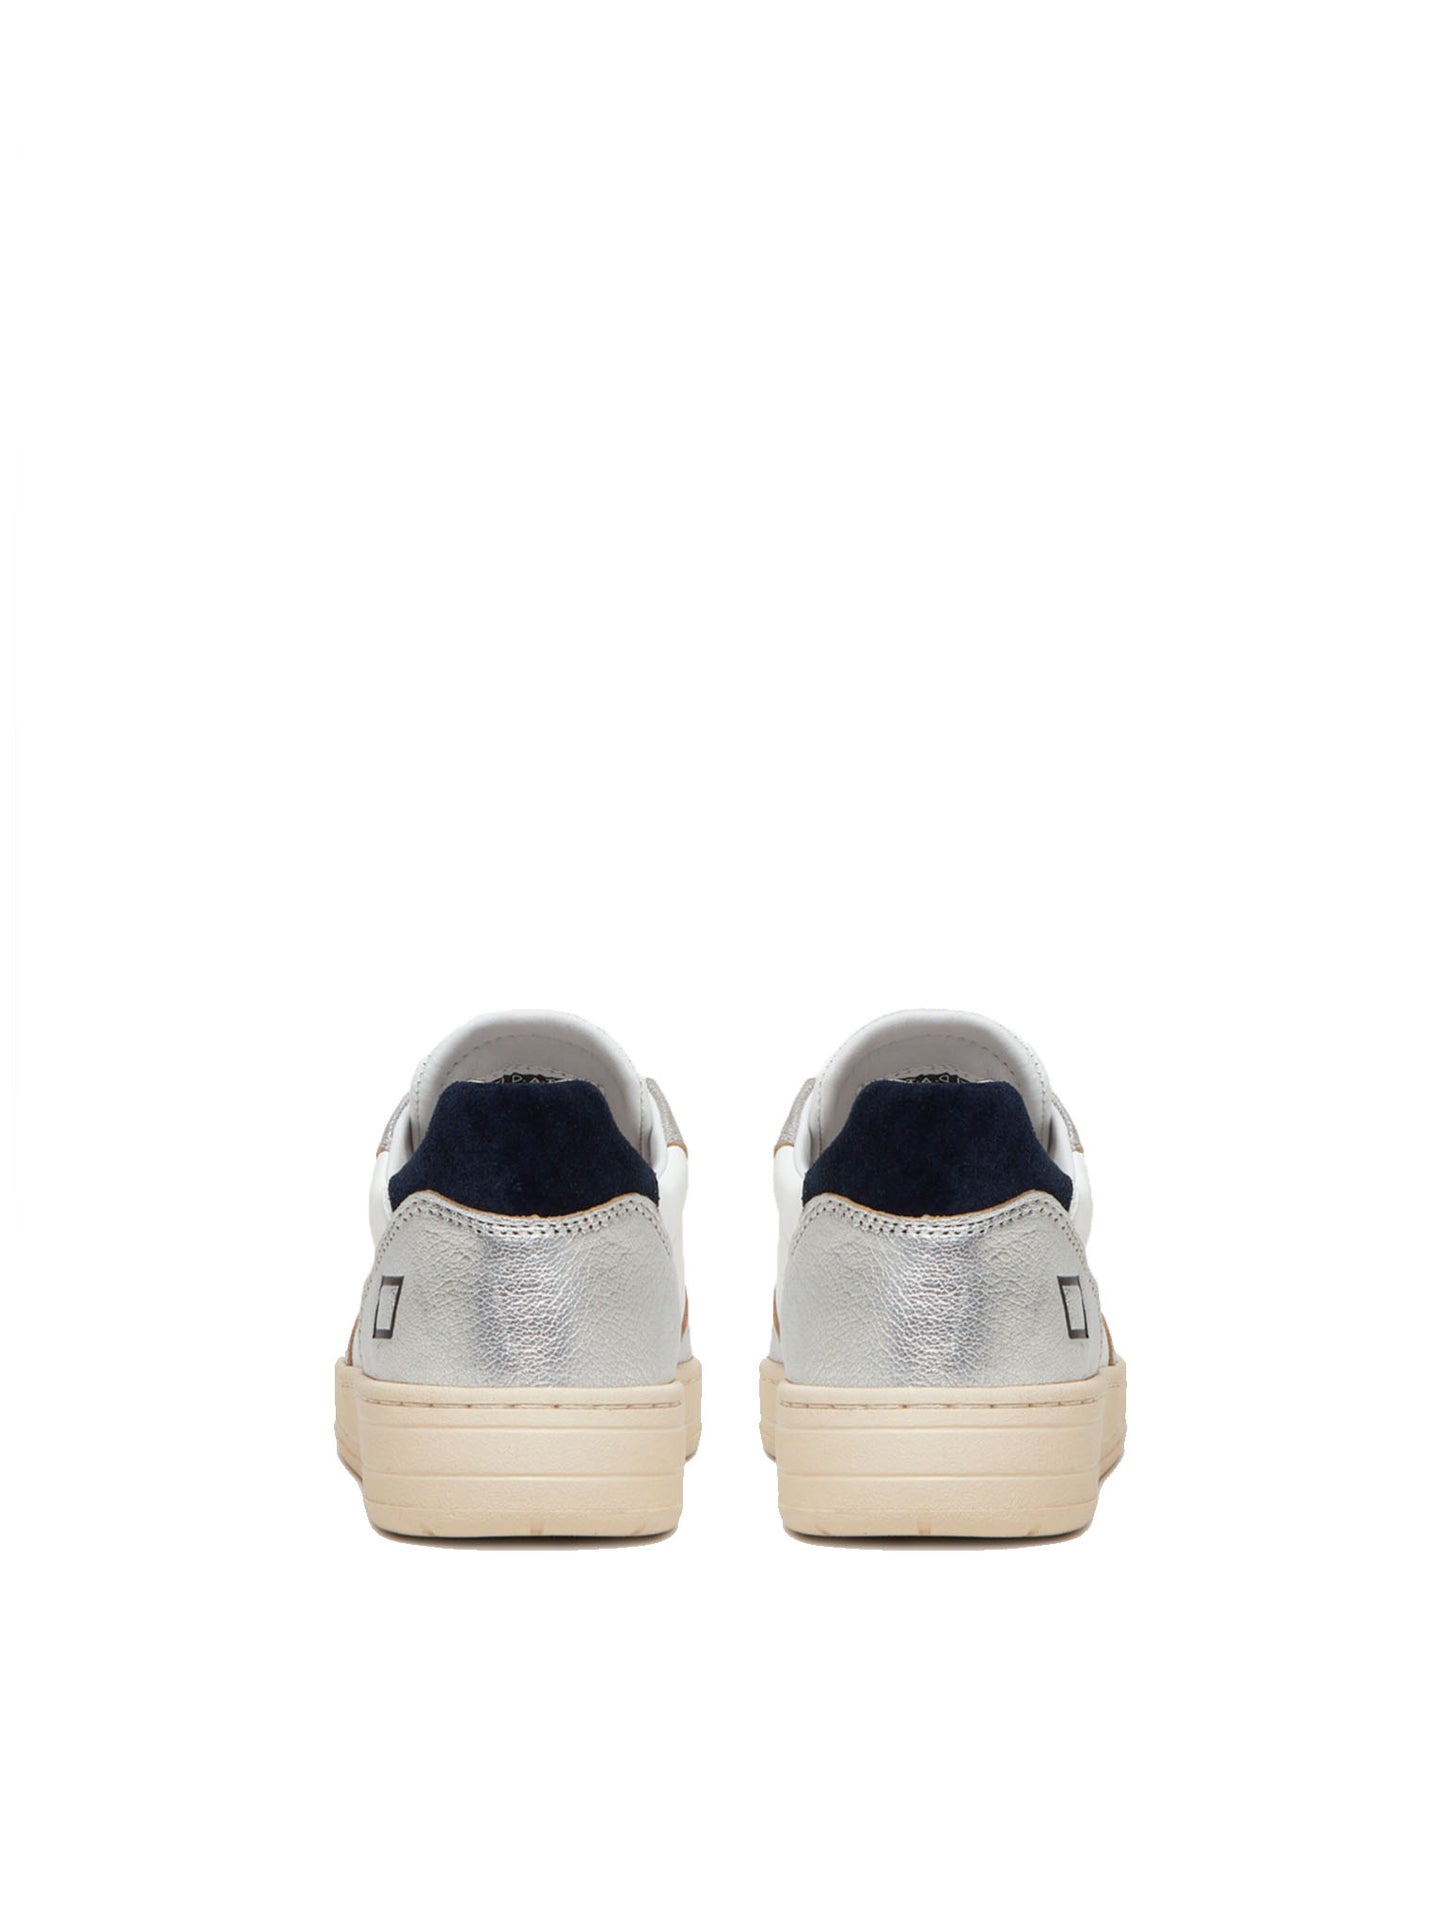 D.A.T.E Court Laminated White Silver Trainers from the Back Cutout